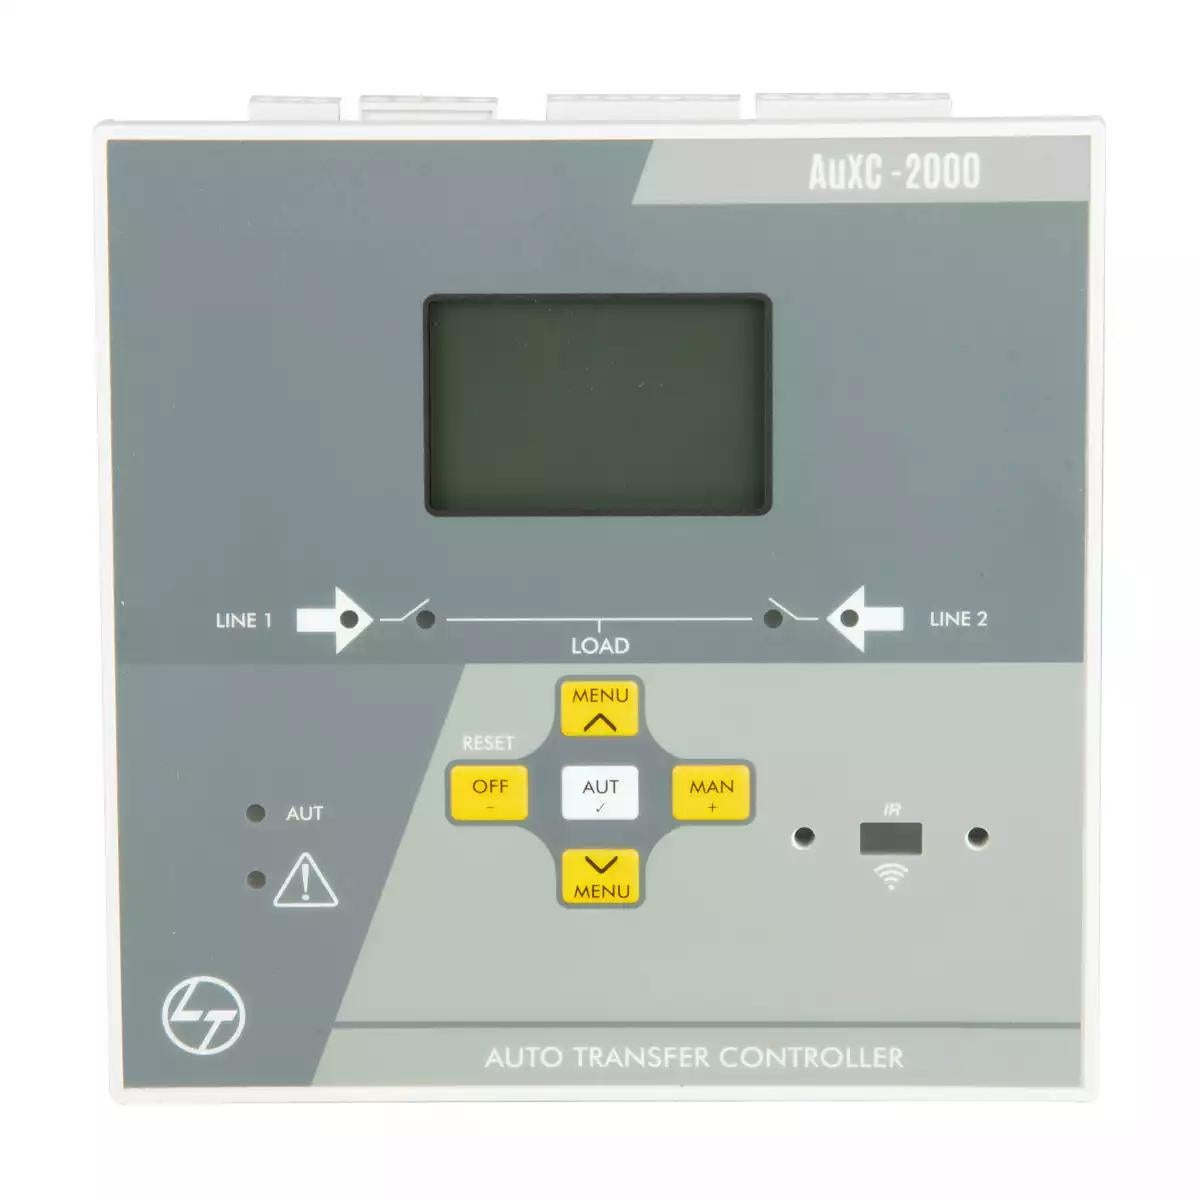 AuXC 2000 Controller for Motorised Changeover Switch